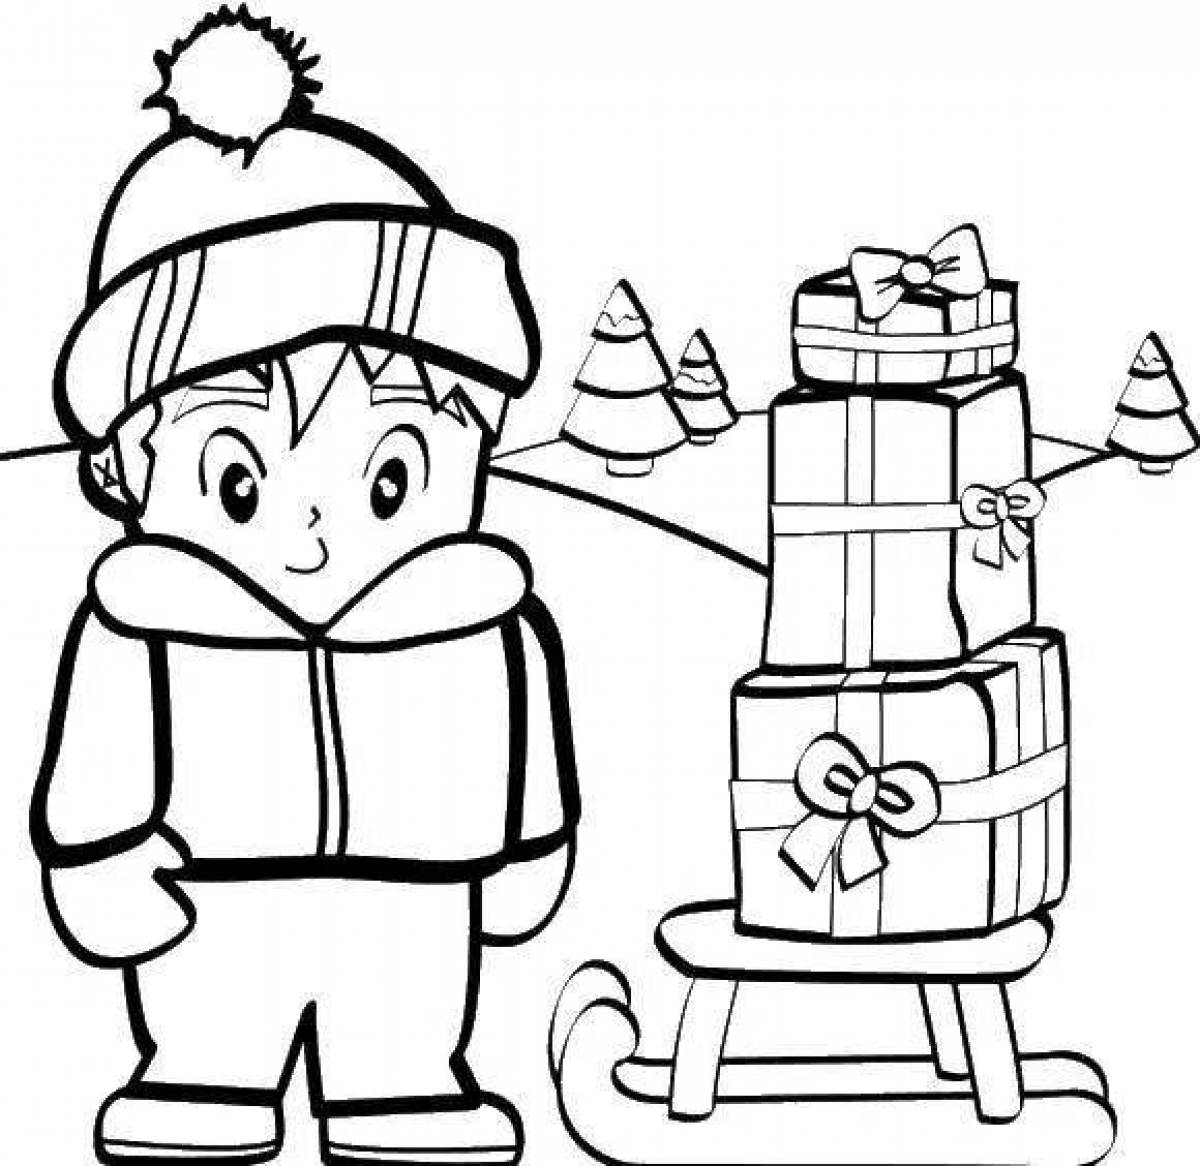 Fun coloring book for kids boy in winter clothes